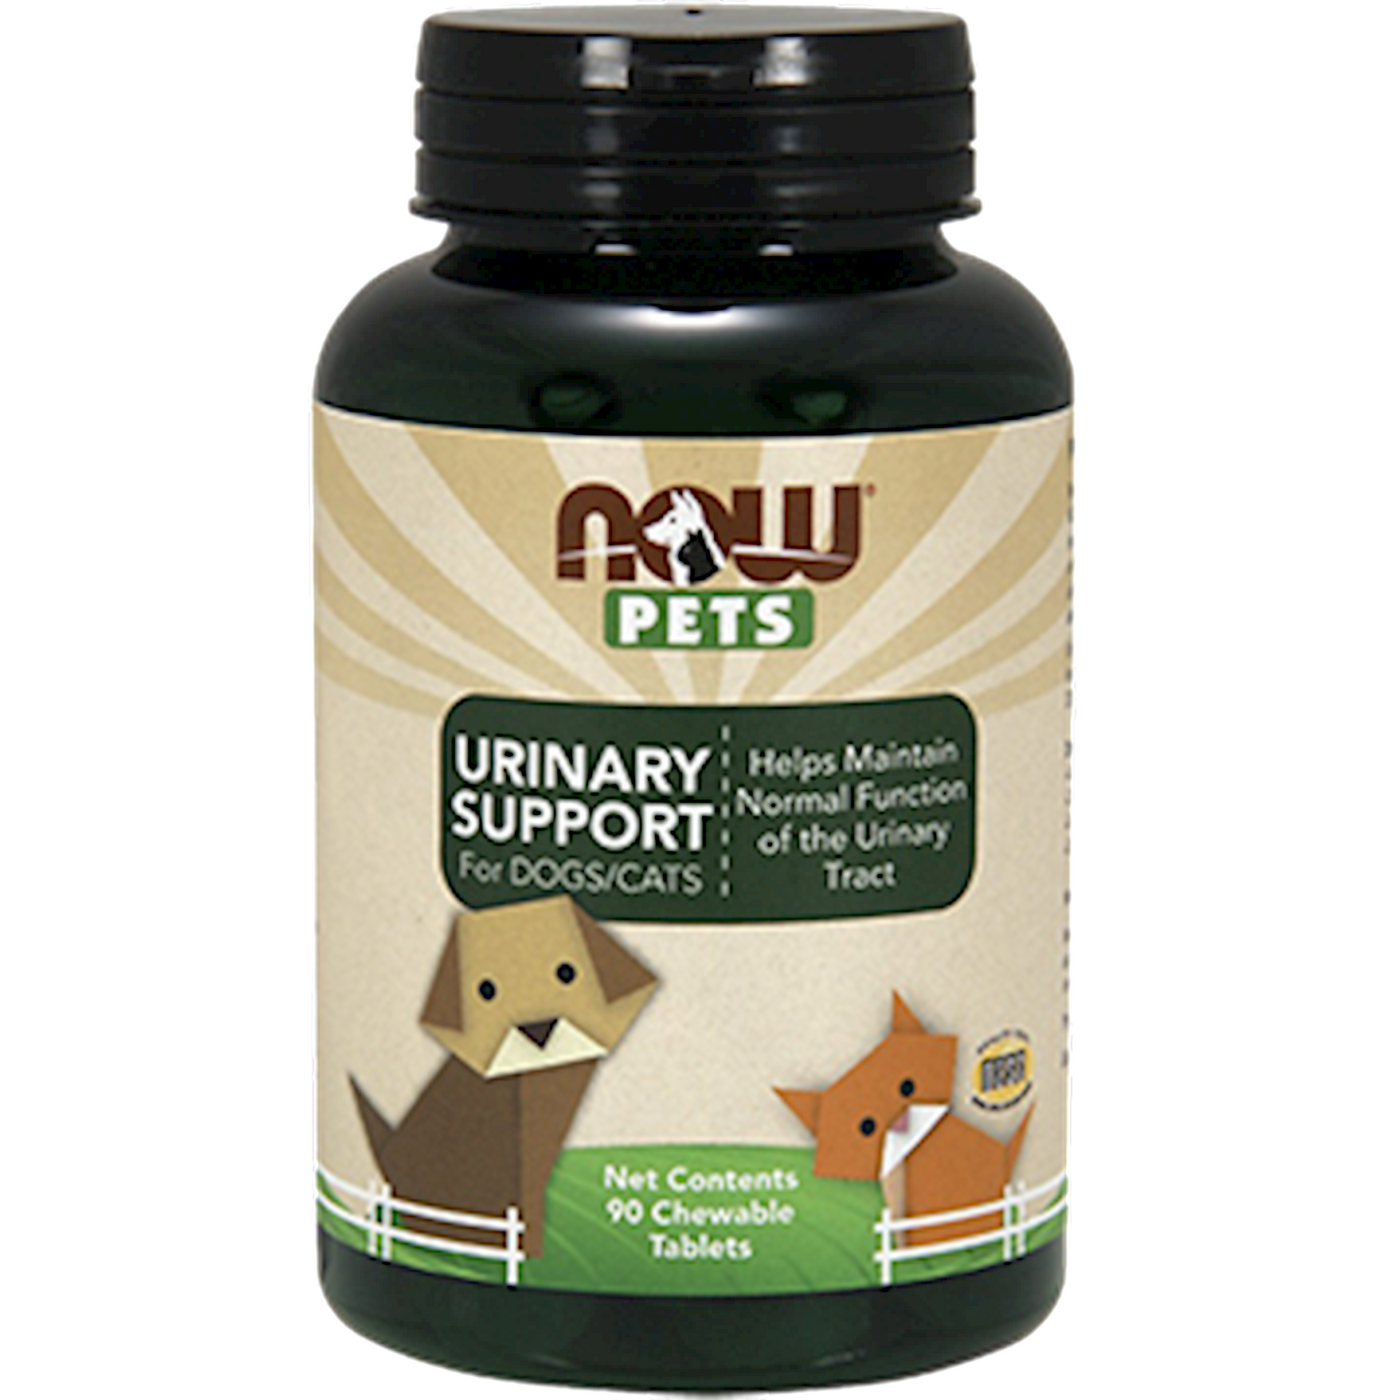 Urinary Support for Dogs/Cats 90 tabs Curated Wellness